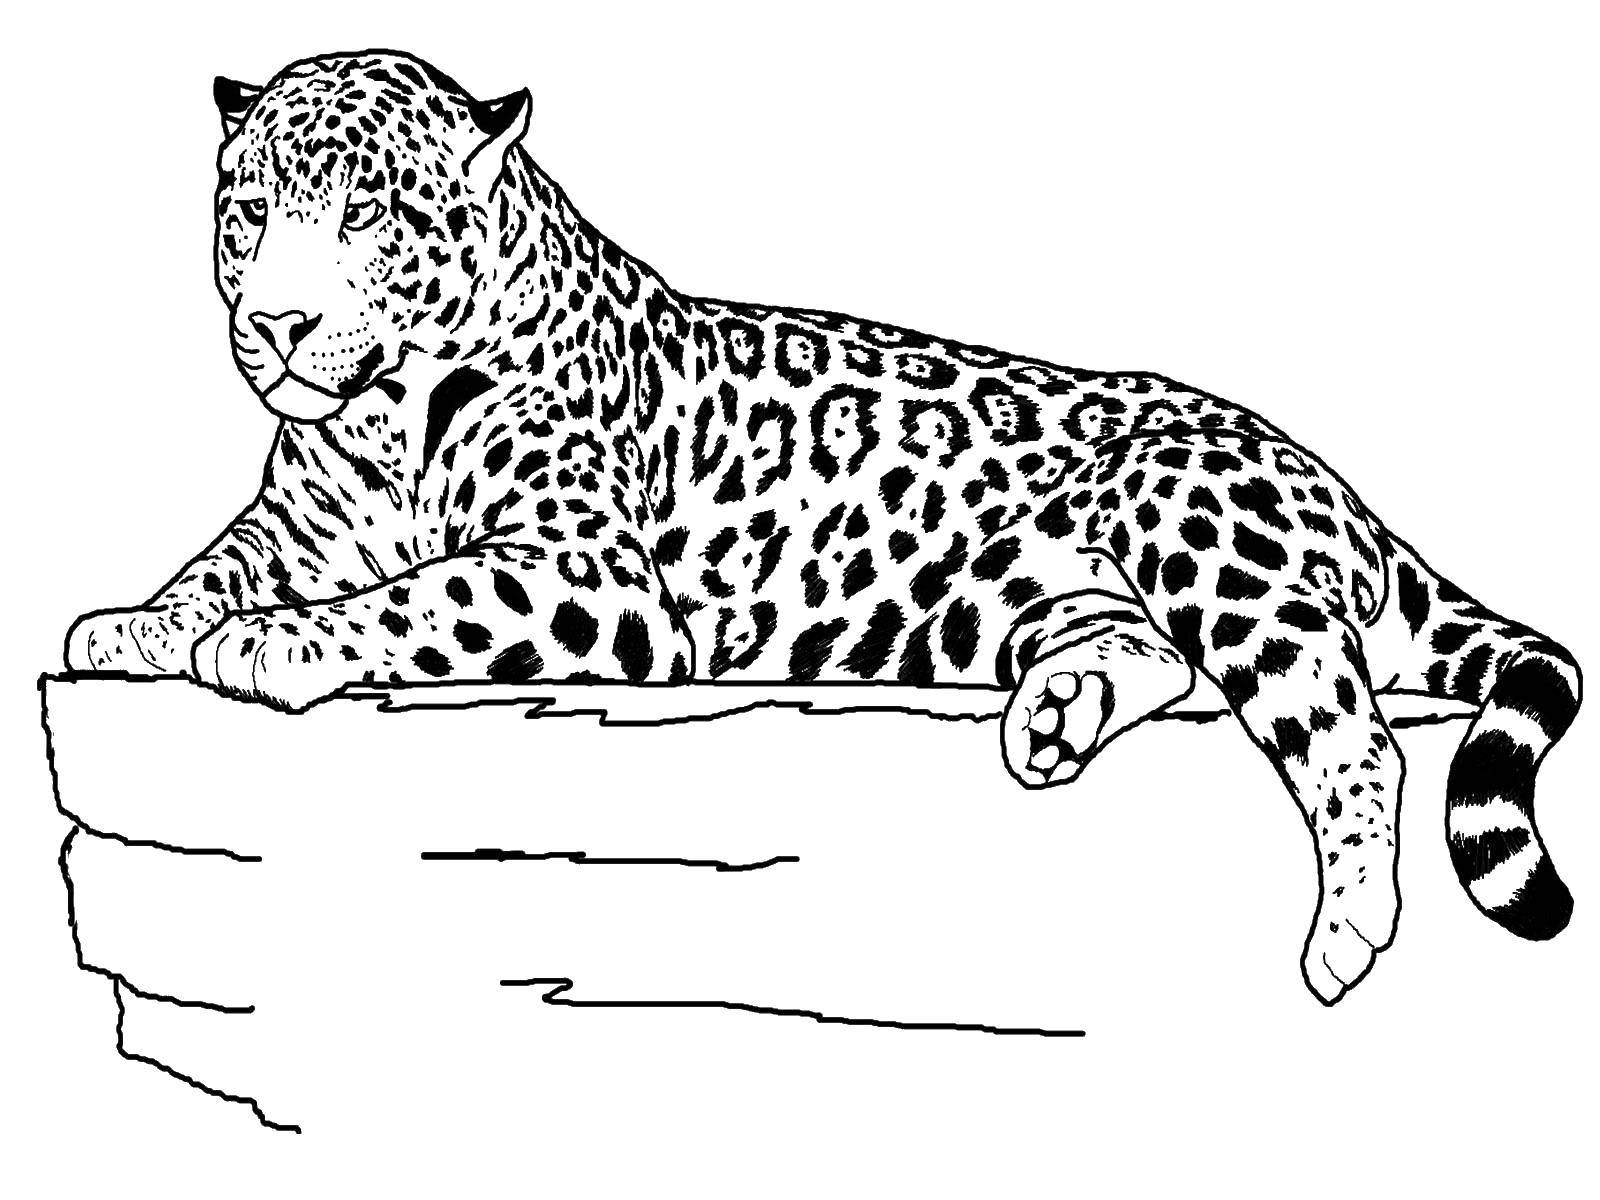 Coloring Leopard. Category Animals. Tags:  animals, nature, leopard.